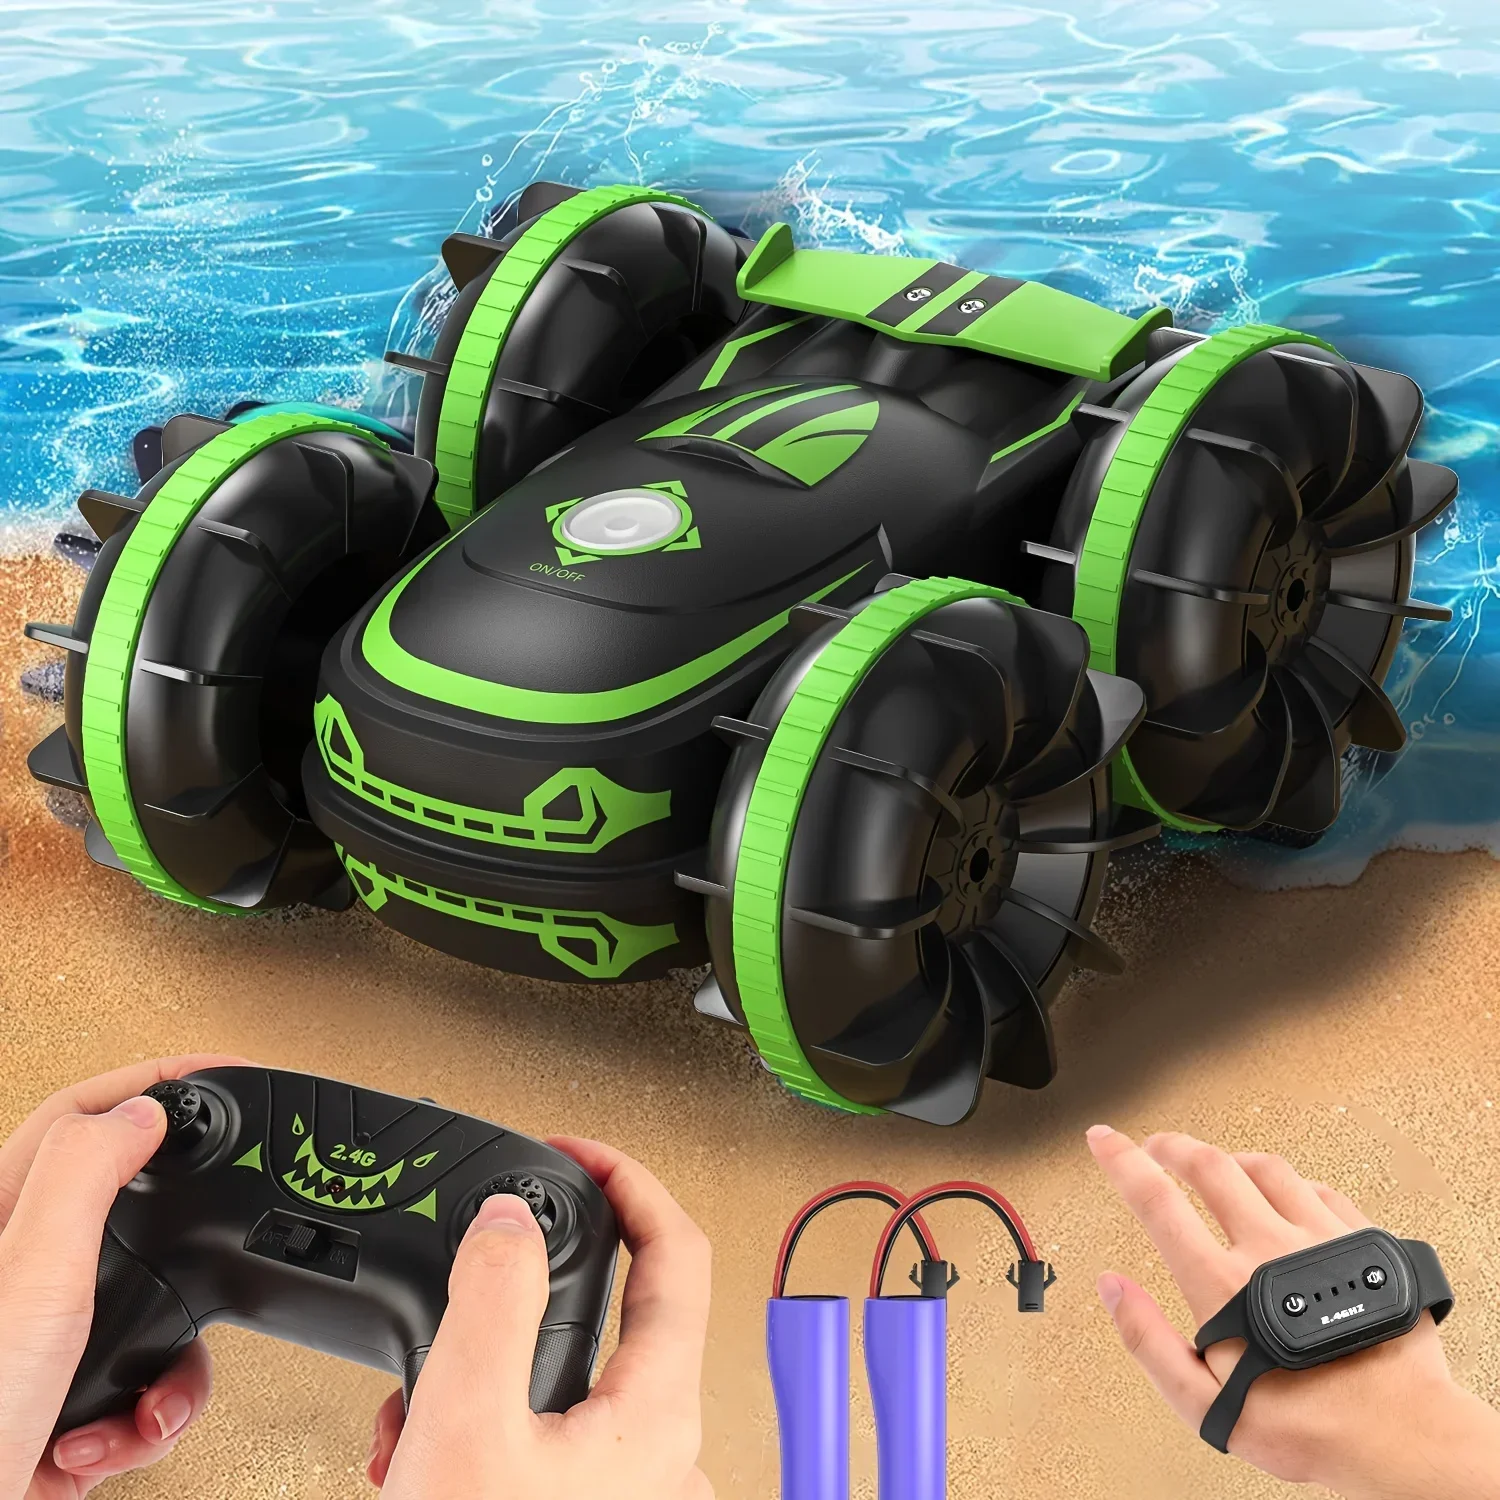 

Amphibious RC Car Toy, 360° Rotating Waterproof RC Stunt Car With Gesture Sensor Outdoor Remote Control Four-Wheel BuggyToy Car